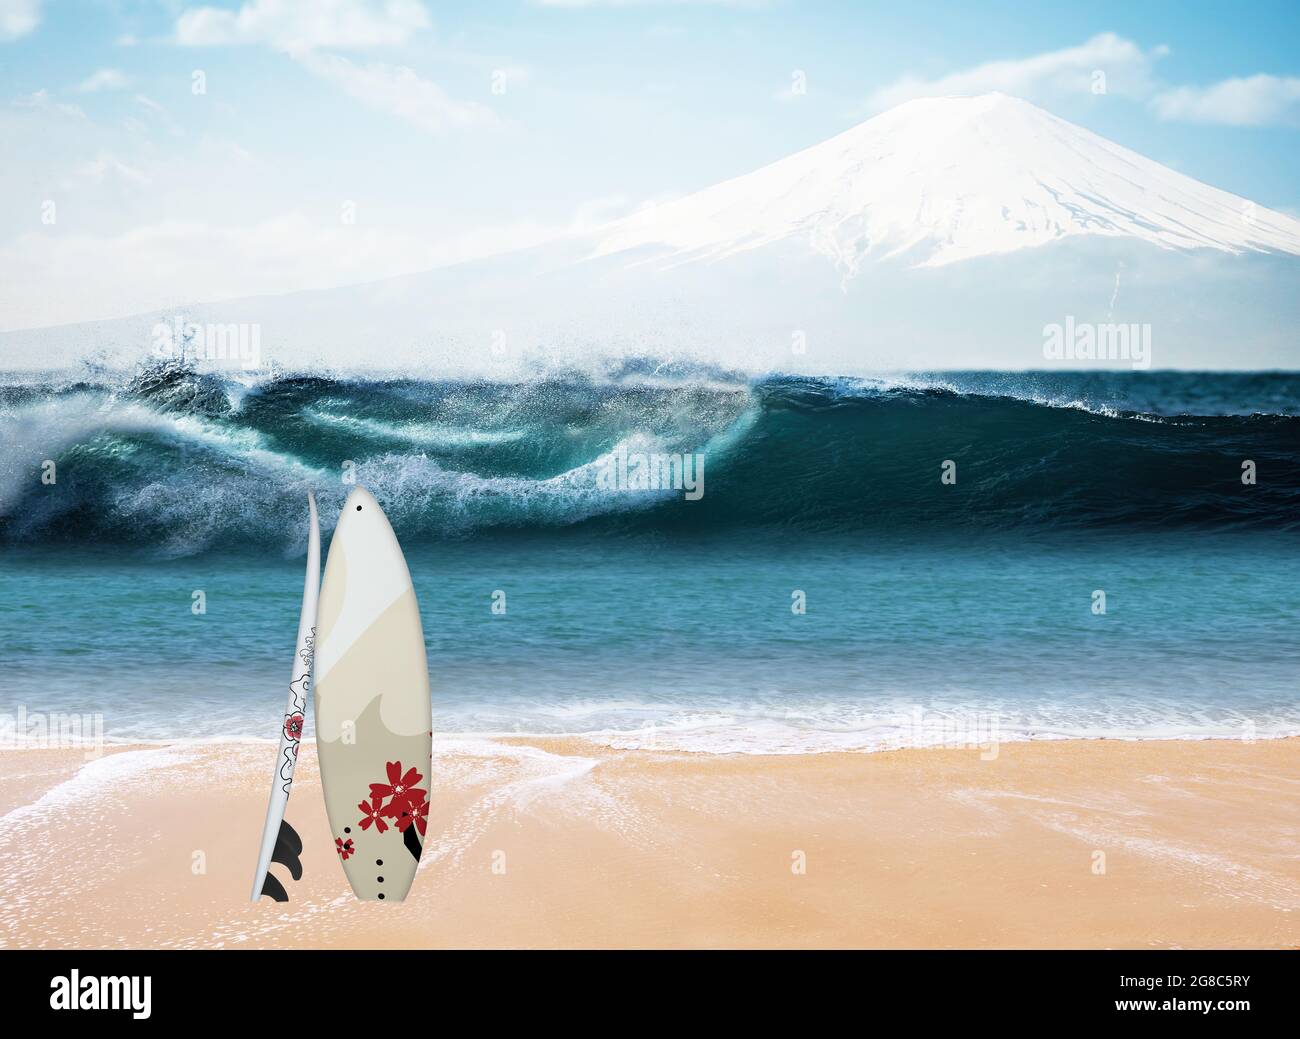 Tokyo with surfing. Giant wave with Mount Fuji in the background. Surfboards in the sand on the beach. Stock Photo